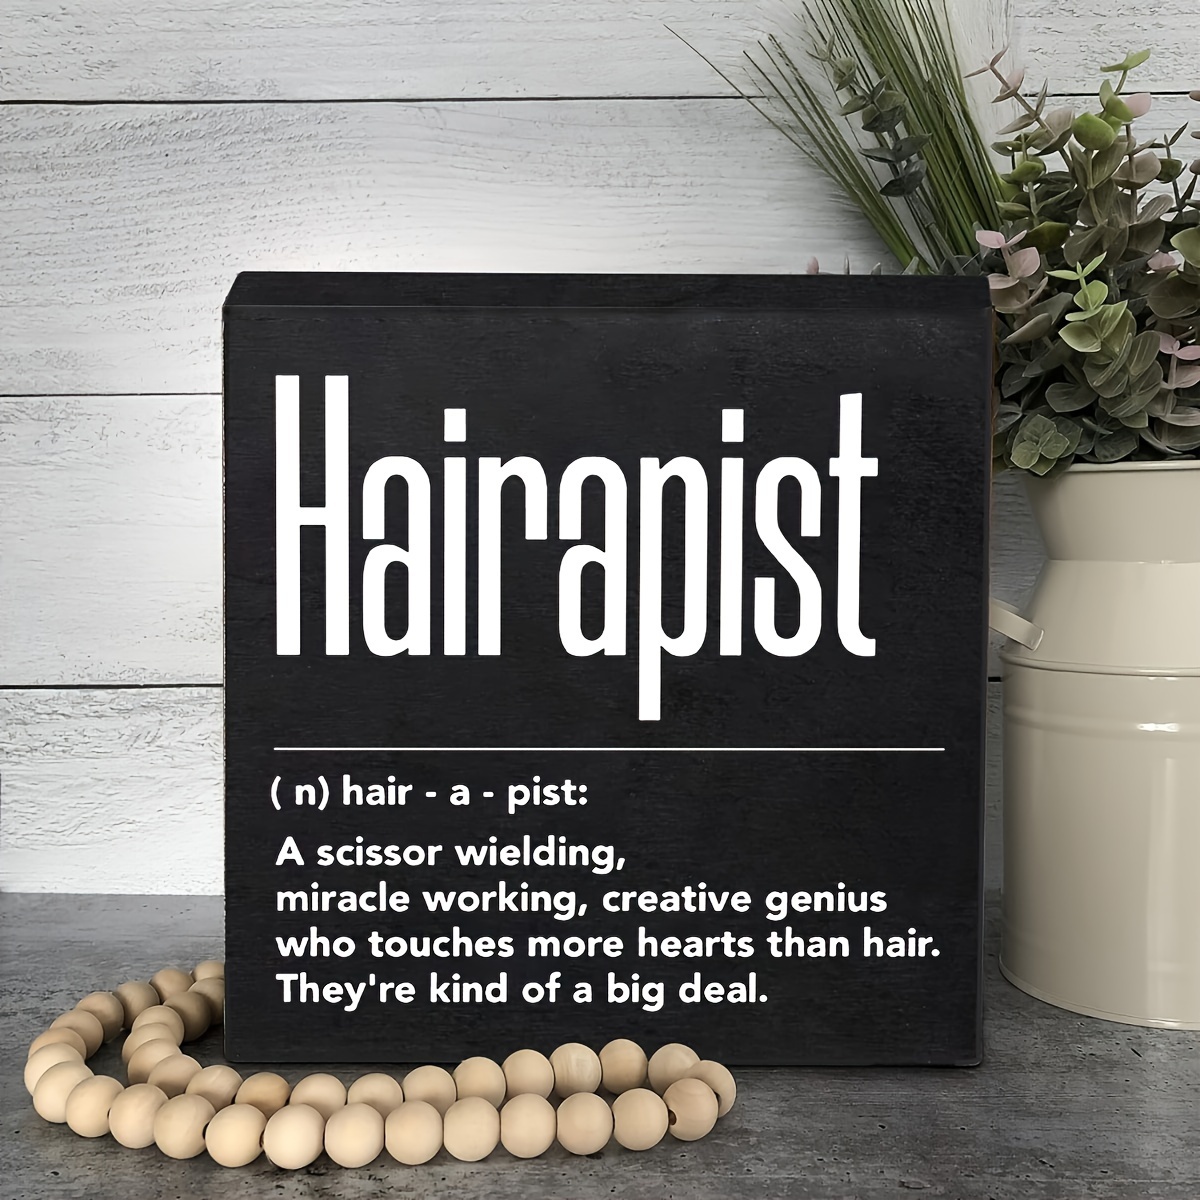 

Hairapist Definition Framed Wall Art - Manufactured Wood Desk Sign Decor, Creative Hair Stylist Inspirational Quote Print - No Electricity Needed, Perfect Gift For Salon Professionals (1pc)